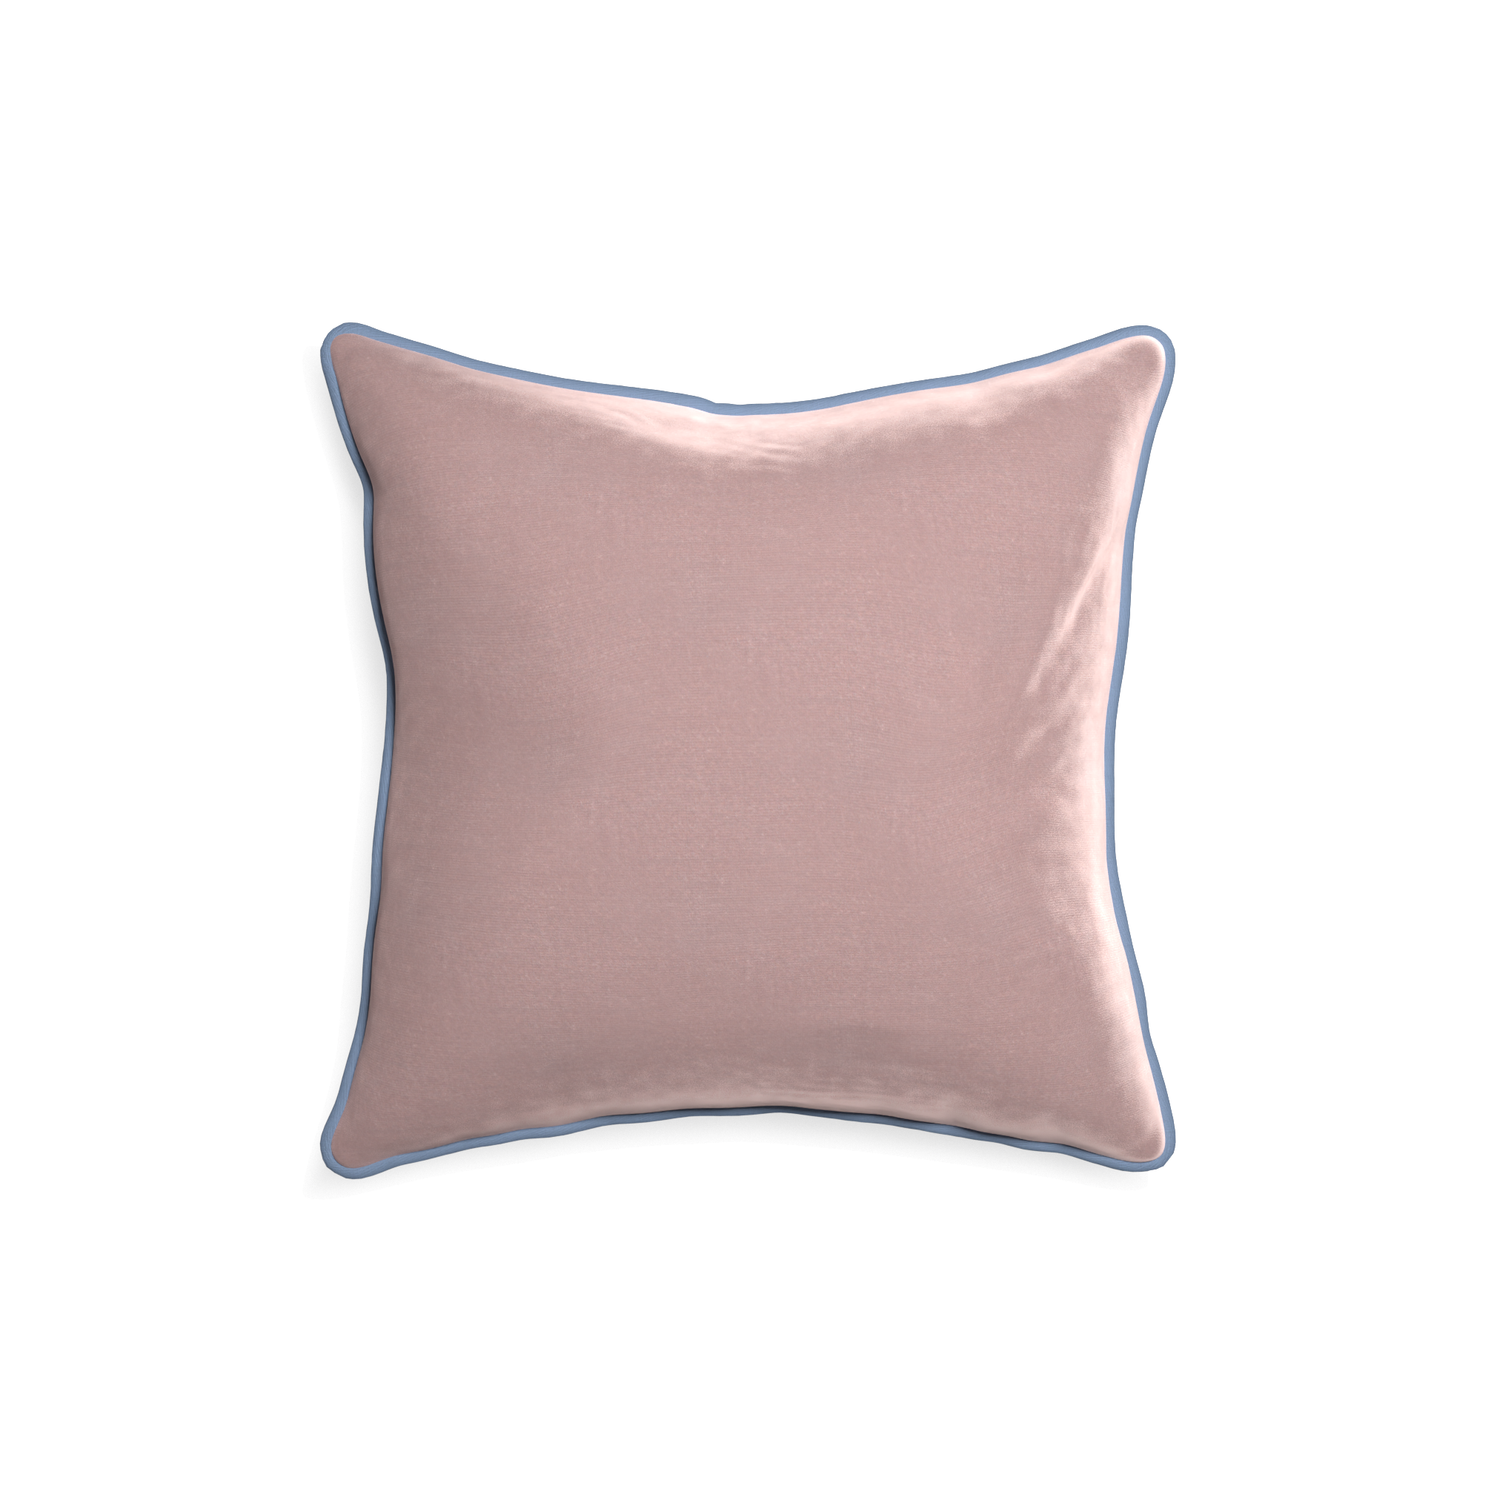 18-square mauve velvet custom pillow with sky piping on white background